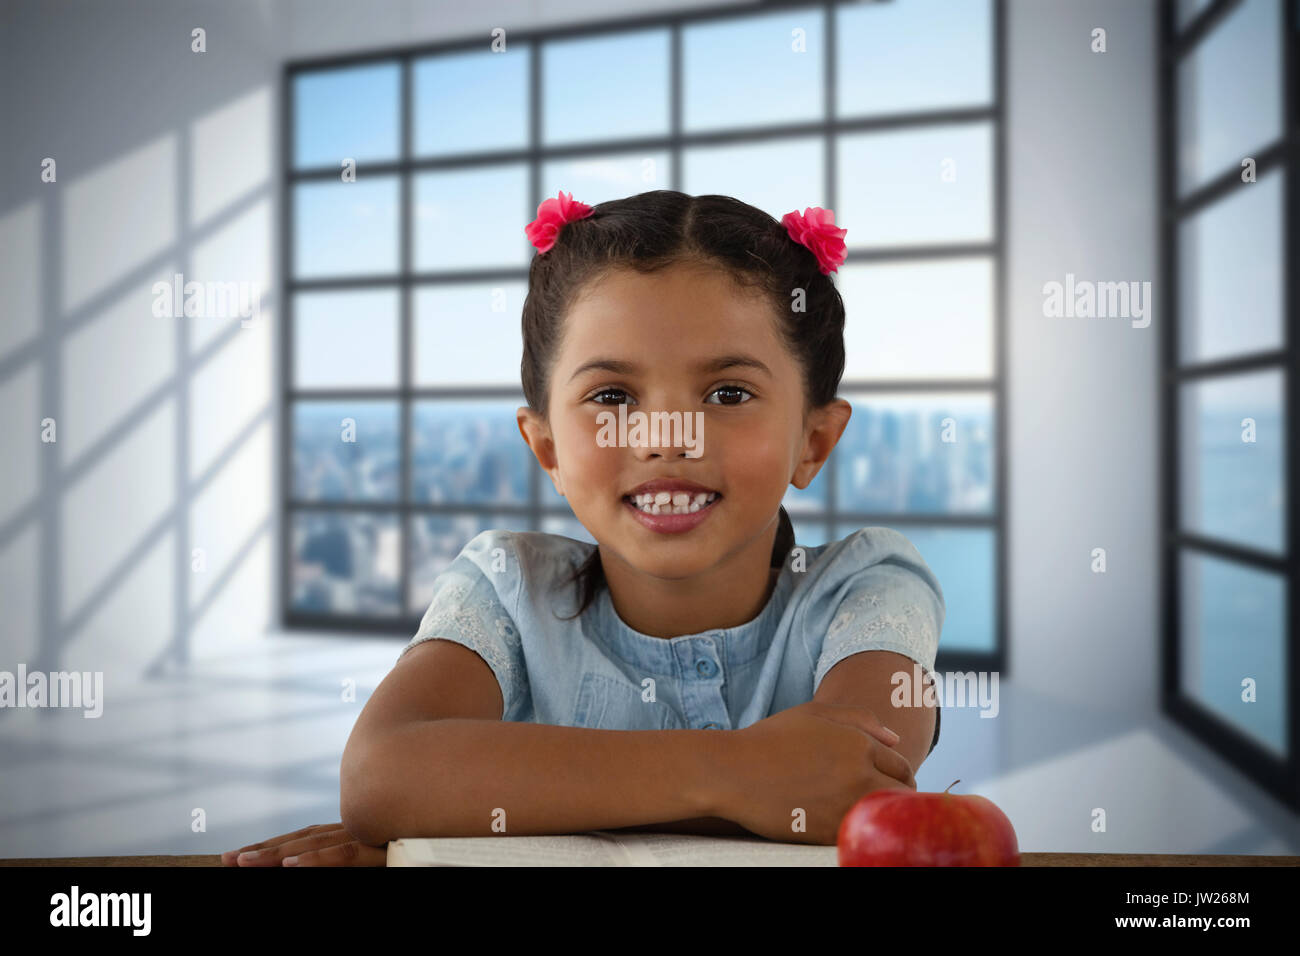 Smiling girl sitting at desk against room with large window showing city Stock Photo